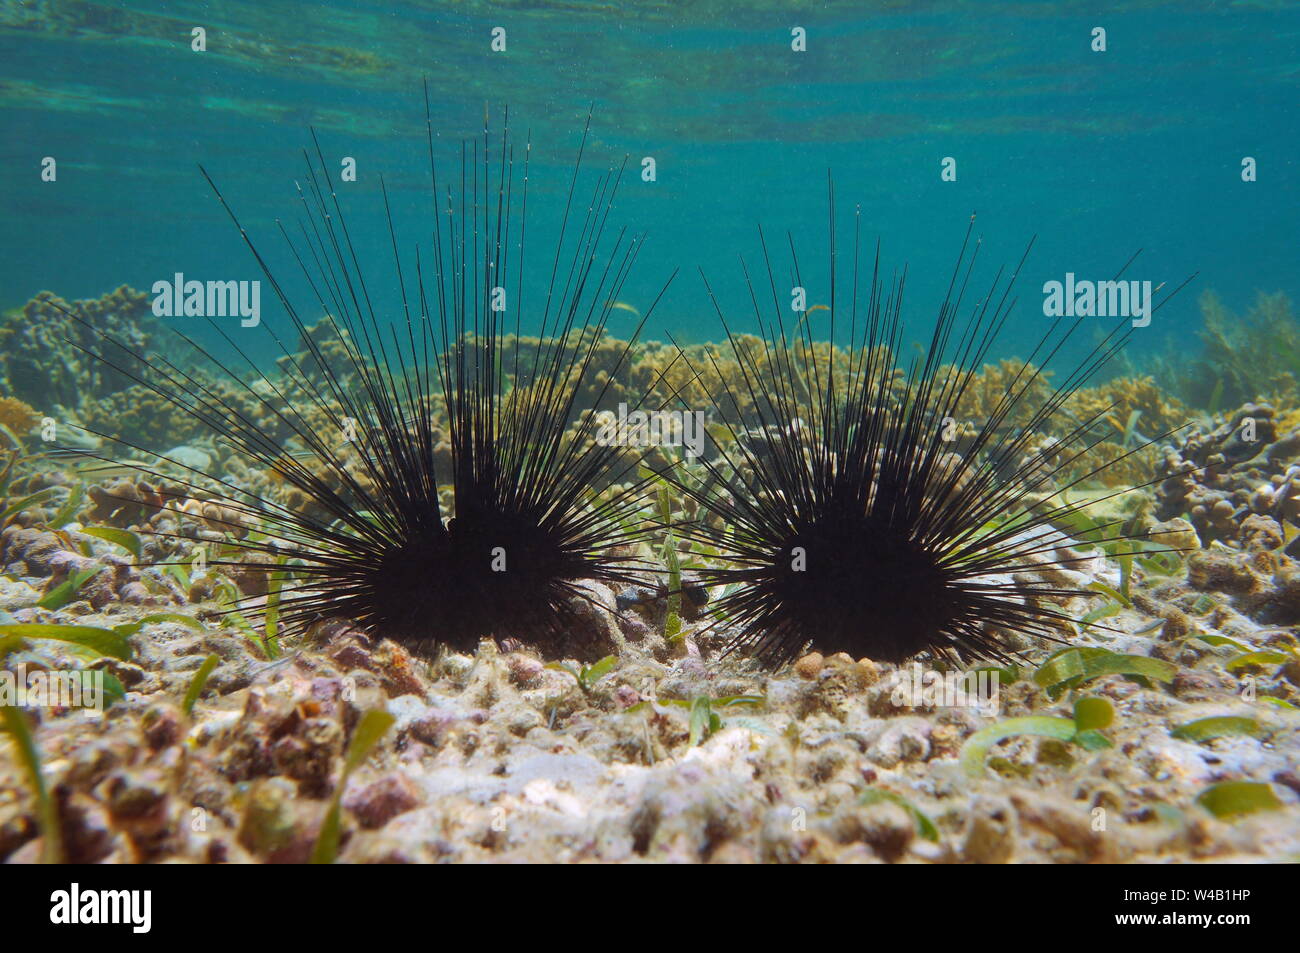 Underwater two long spined sea urchins, Diadema antillarum, on the seabed in the Caribbean sea Stock Photo